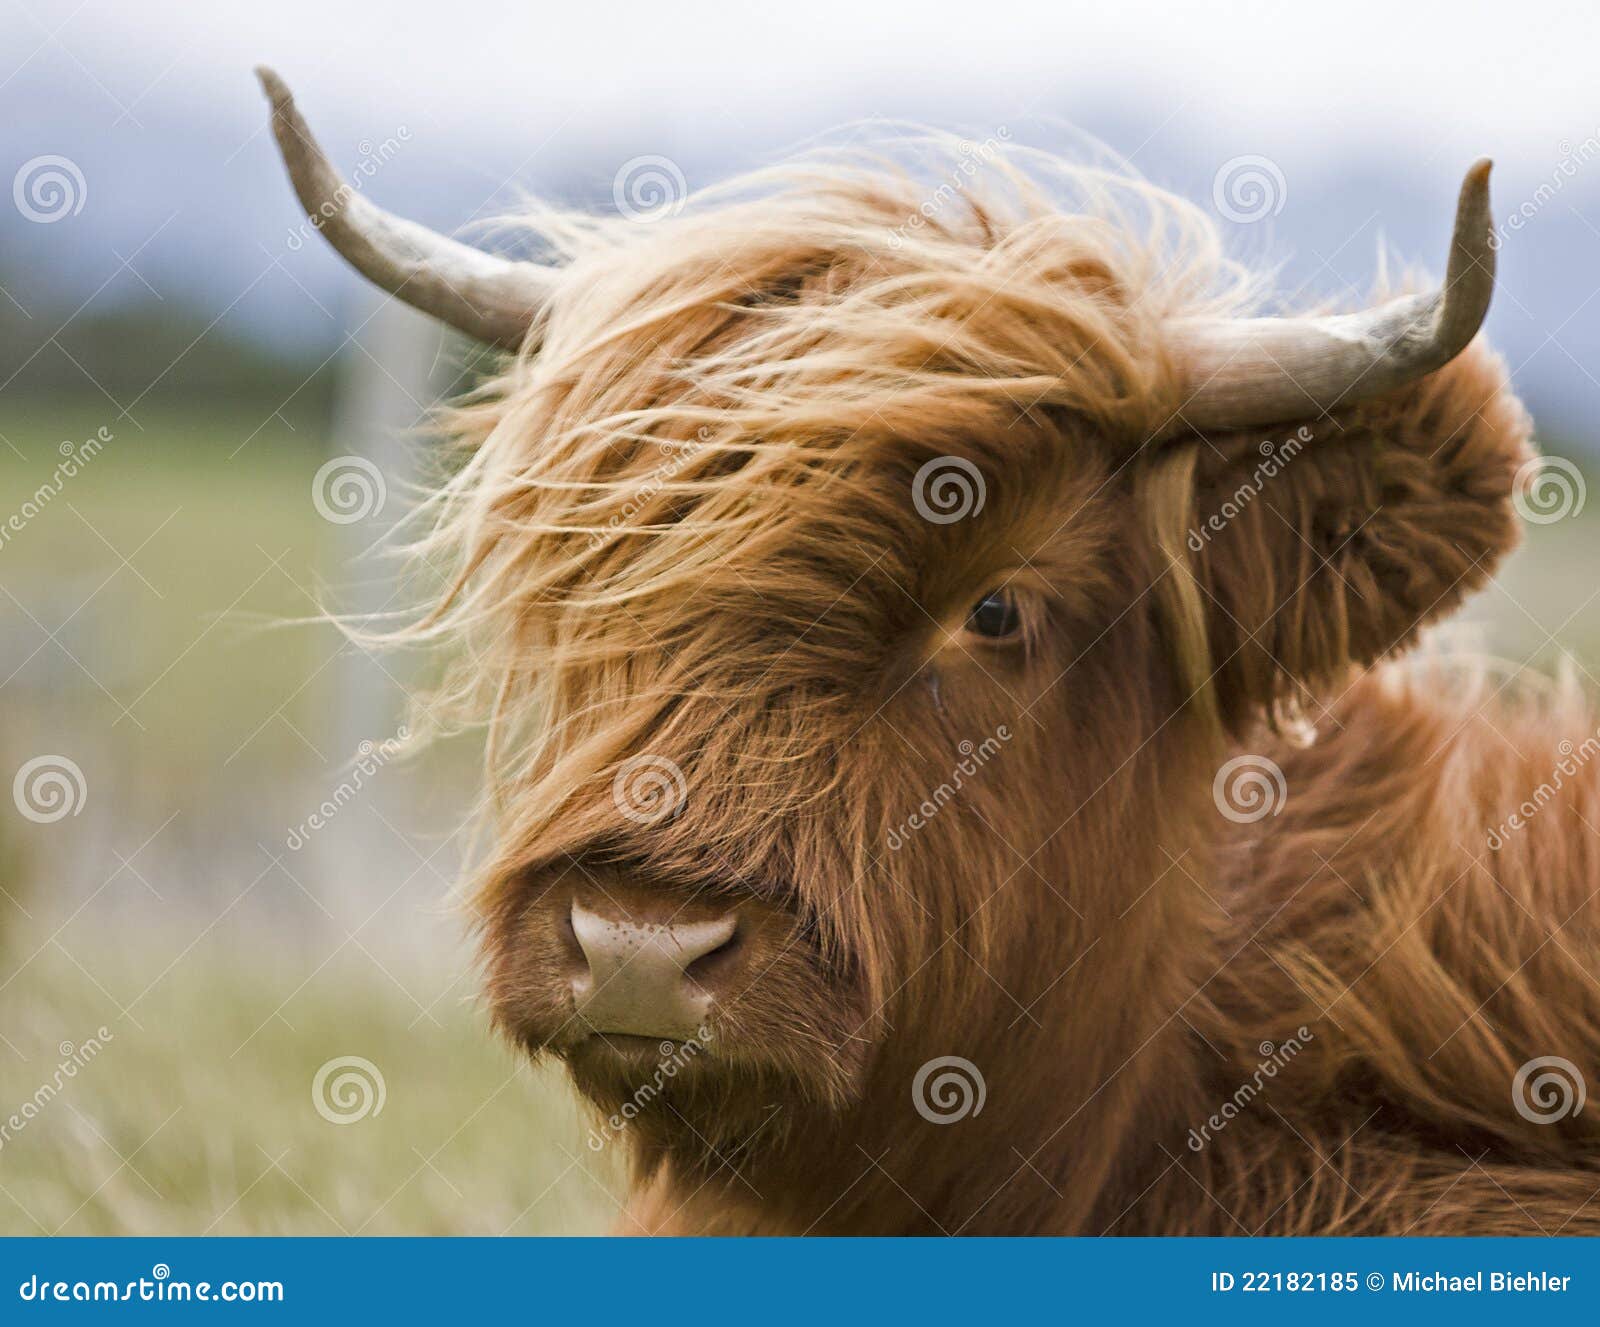 young brown highland cattle